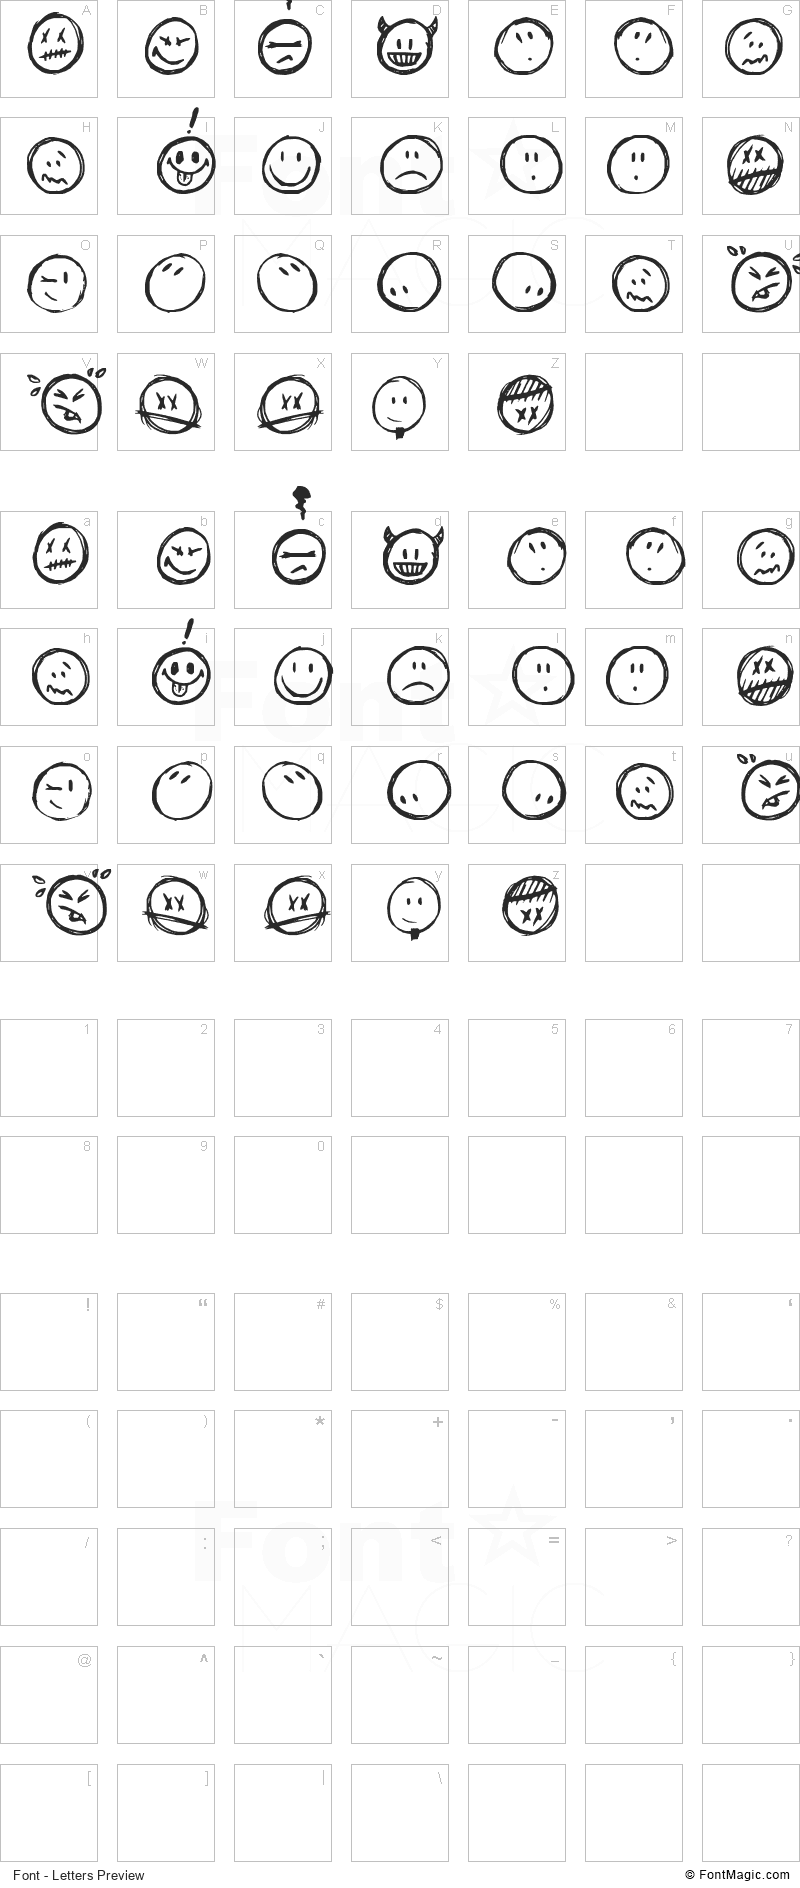 Sketchy Smiley Font - All Latters Preview Chart